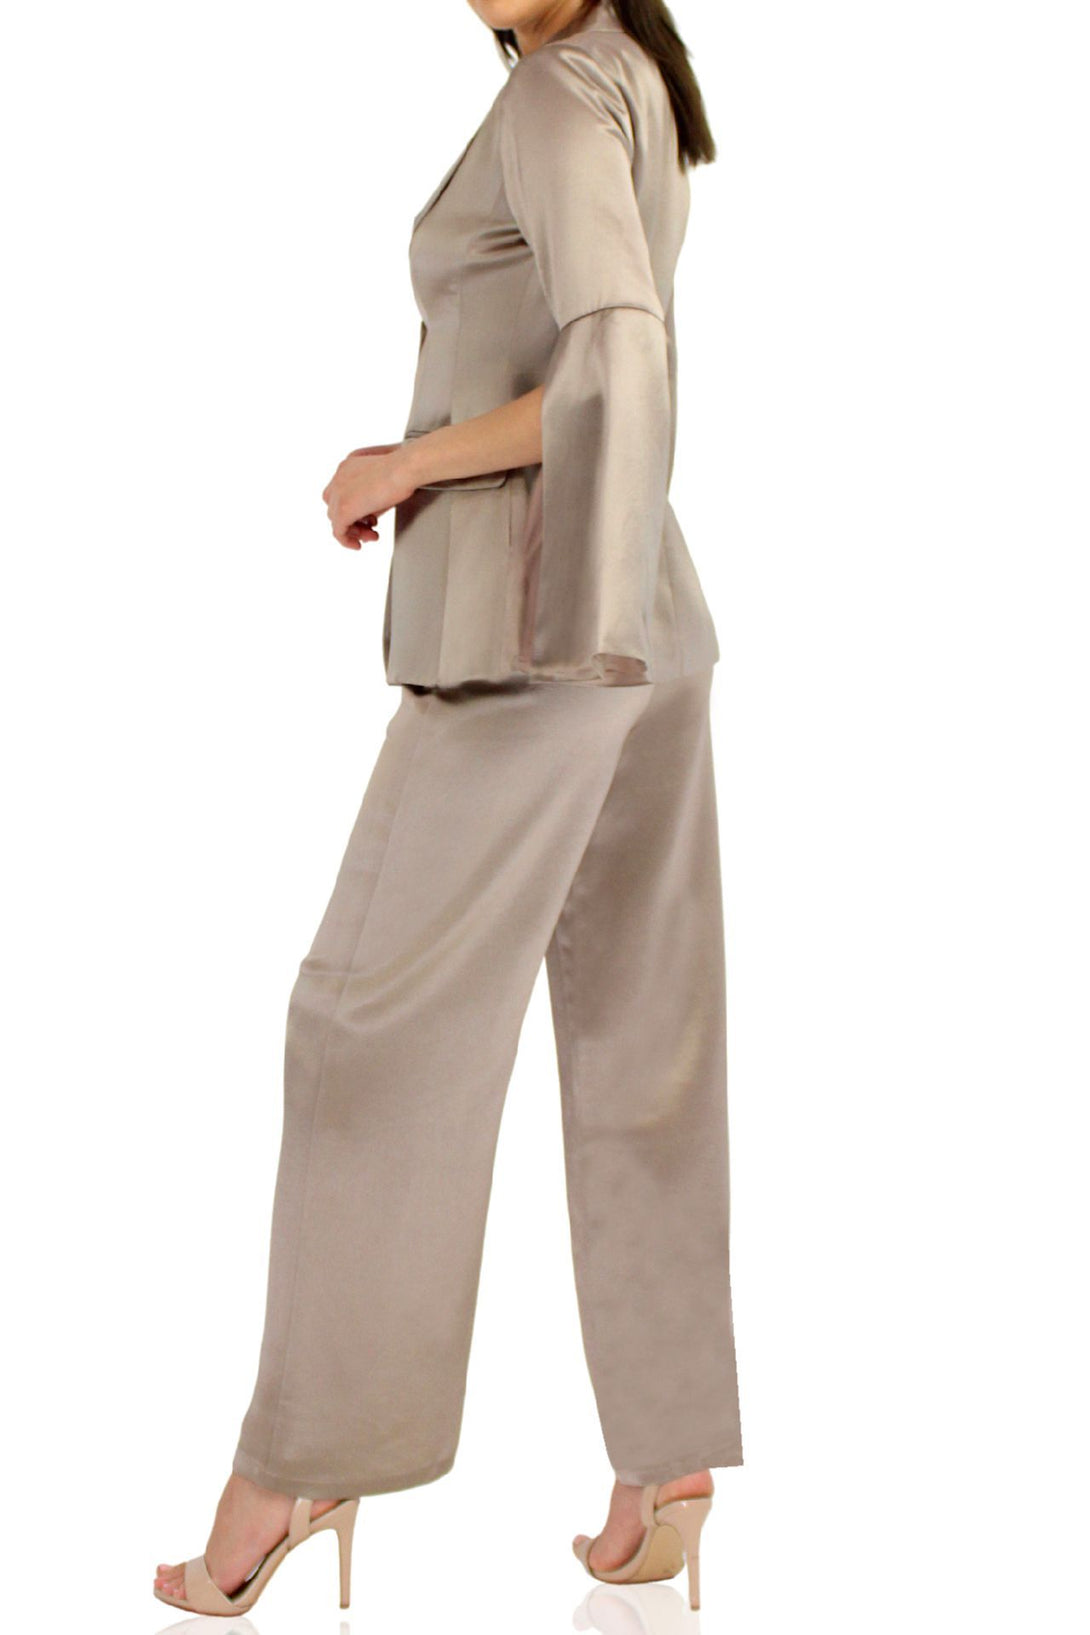 Womens-Designer-Straight-Fit-Pants-By-Kyle-2020